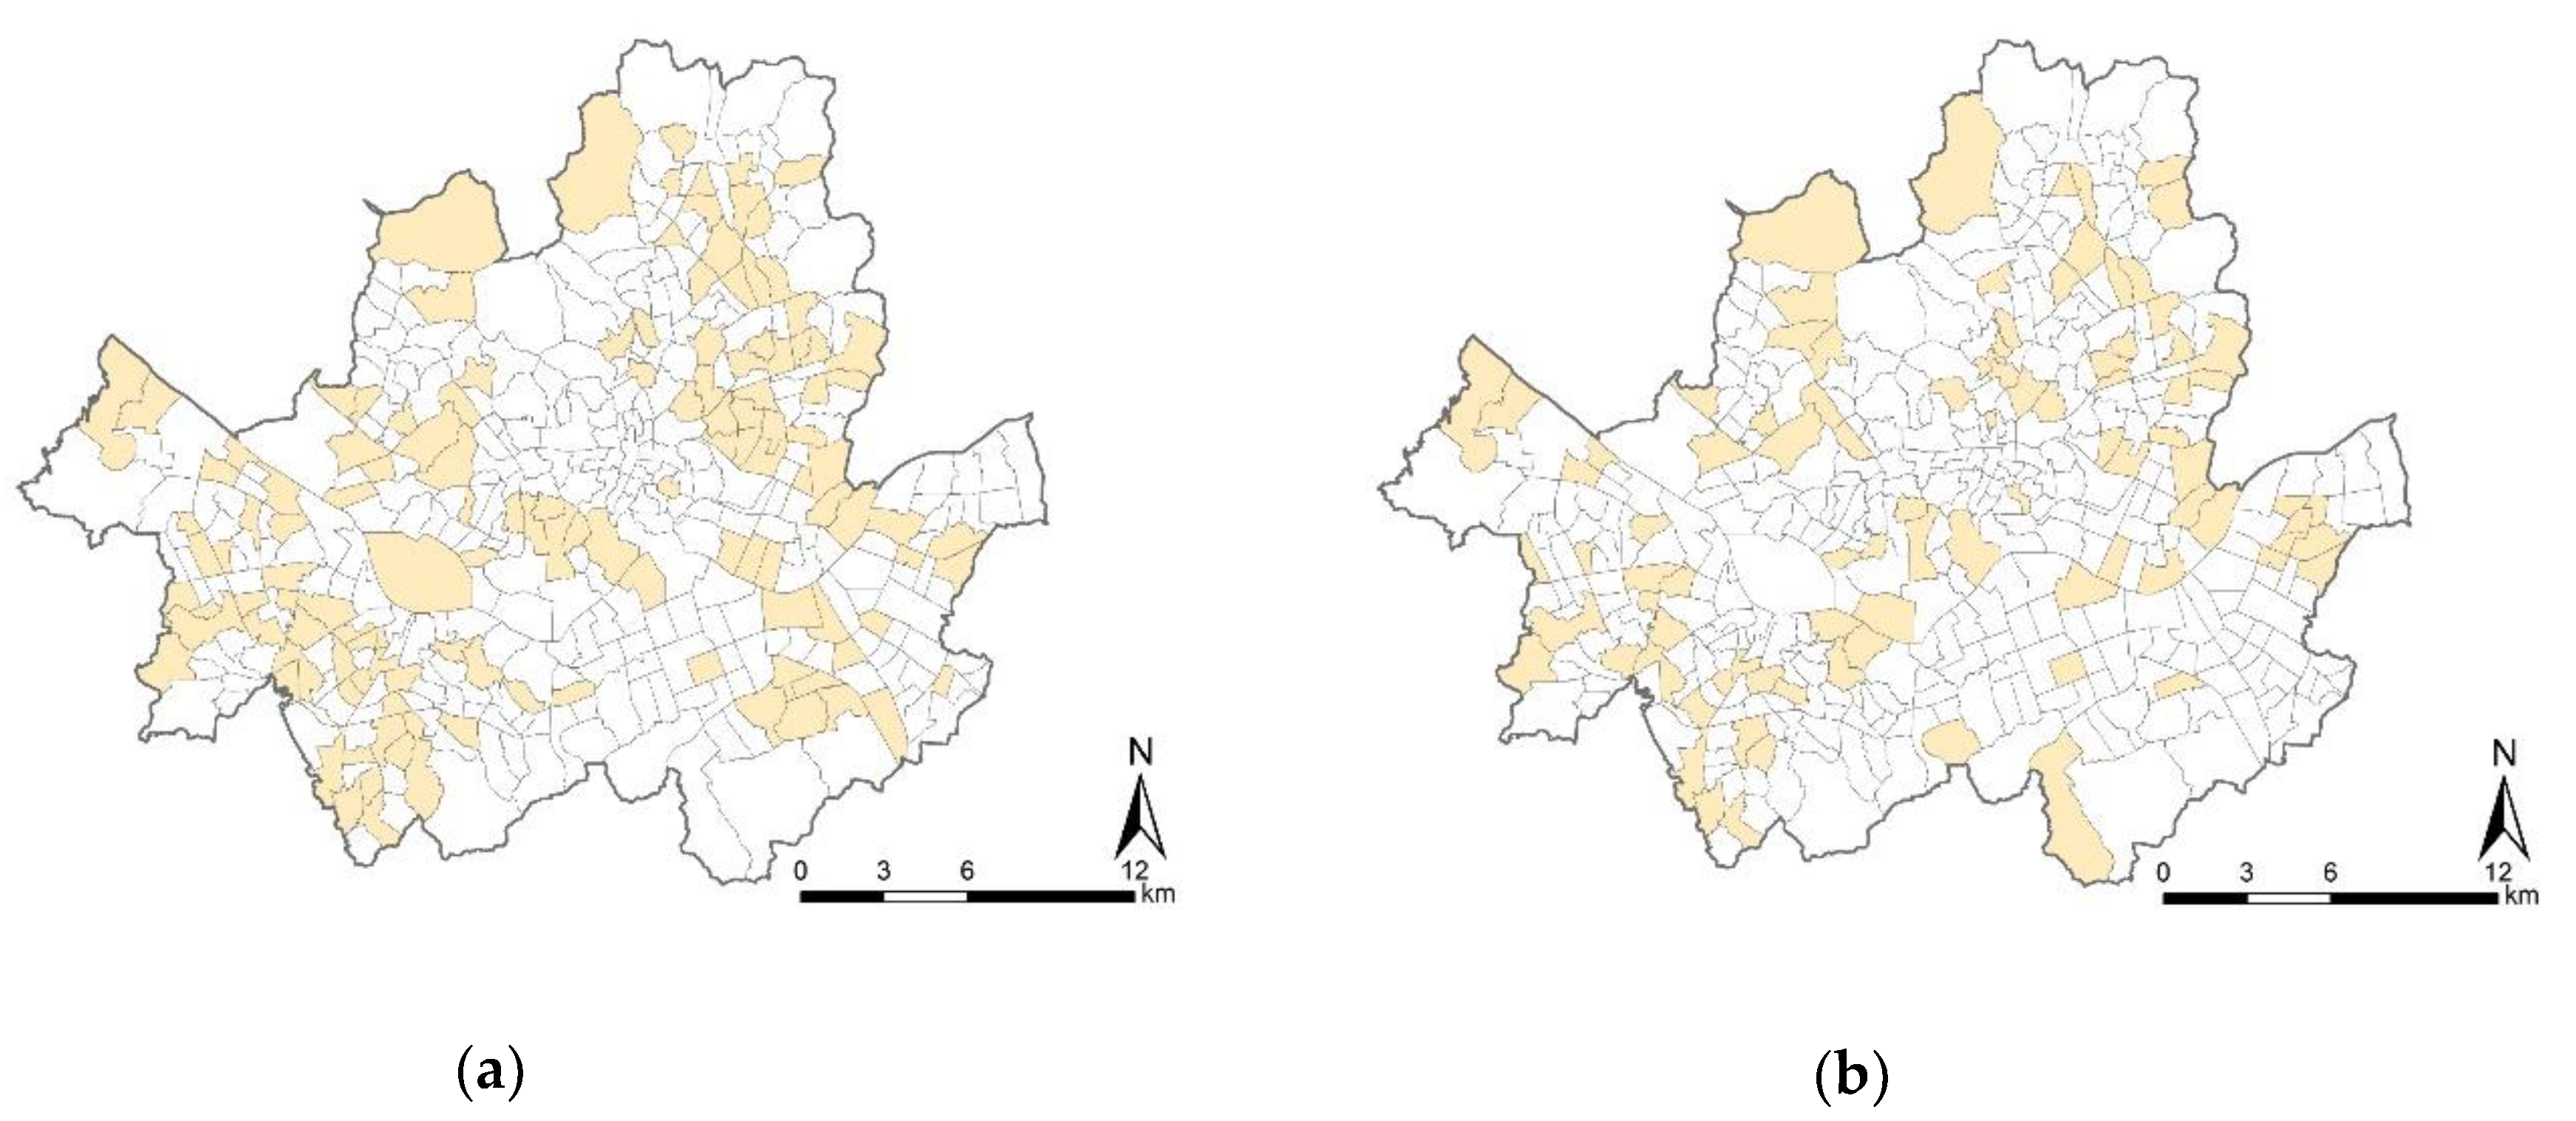 IJERPH | Free Full-Text | Neighborhood Walkability and Active  Transportation: A Correlation Study in Leisure and Shopping Purposes